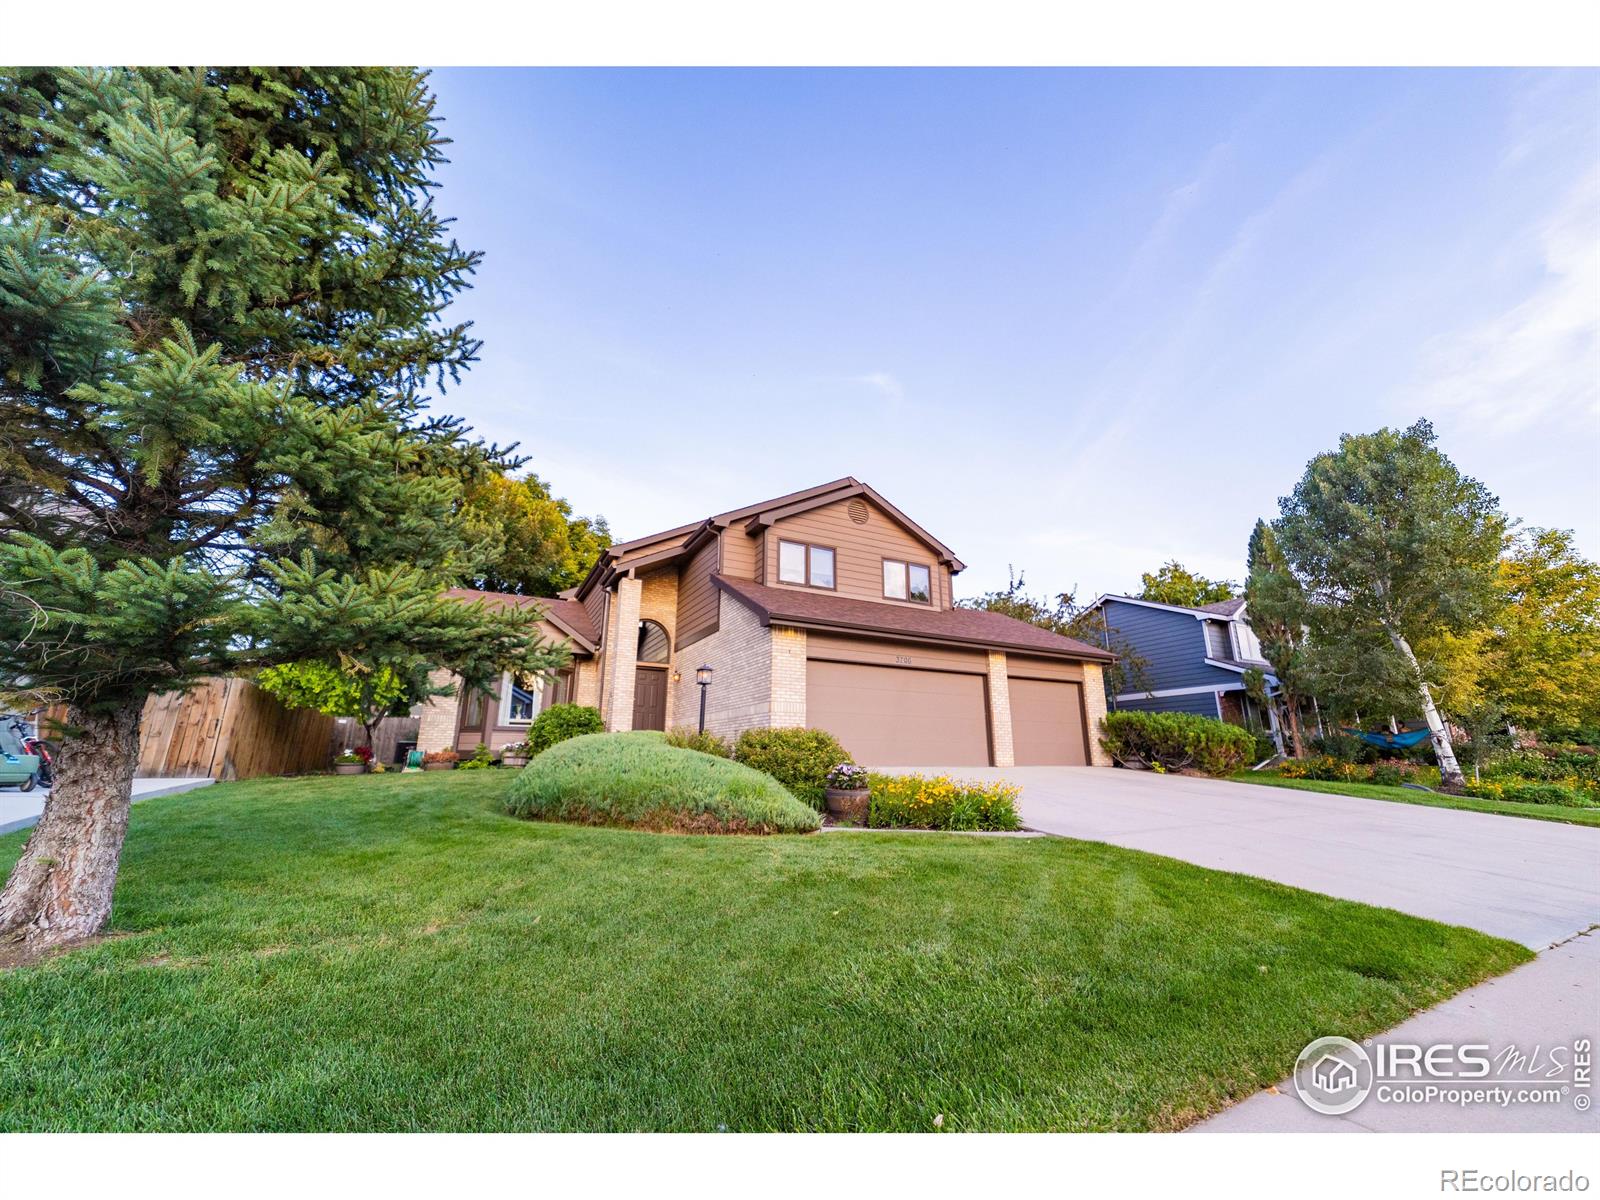 3706  bromley drive, Fort Collins sold home. Closed on 2023-12-26 for $750,000.